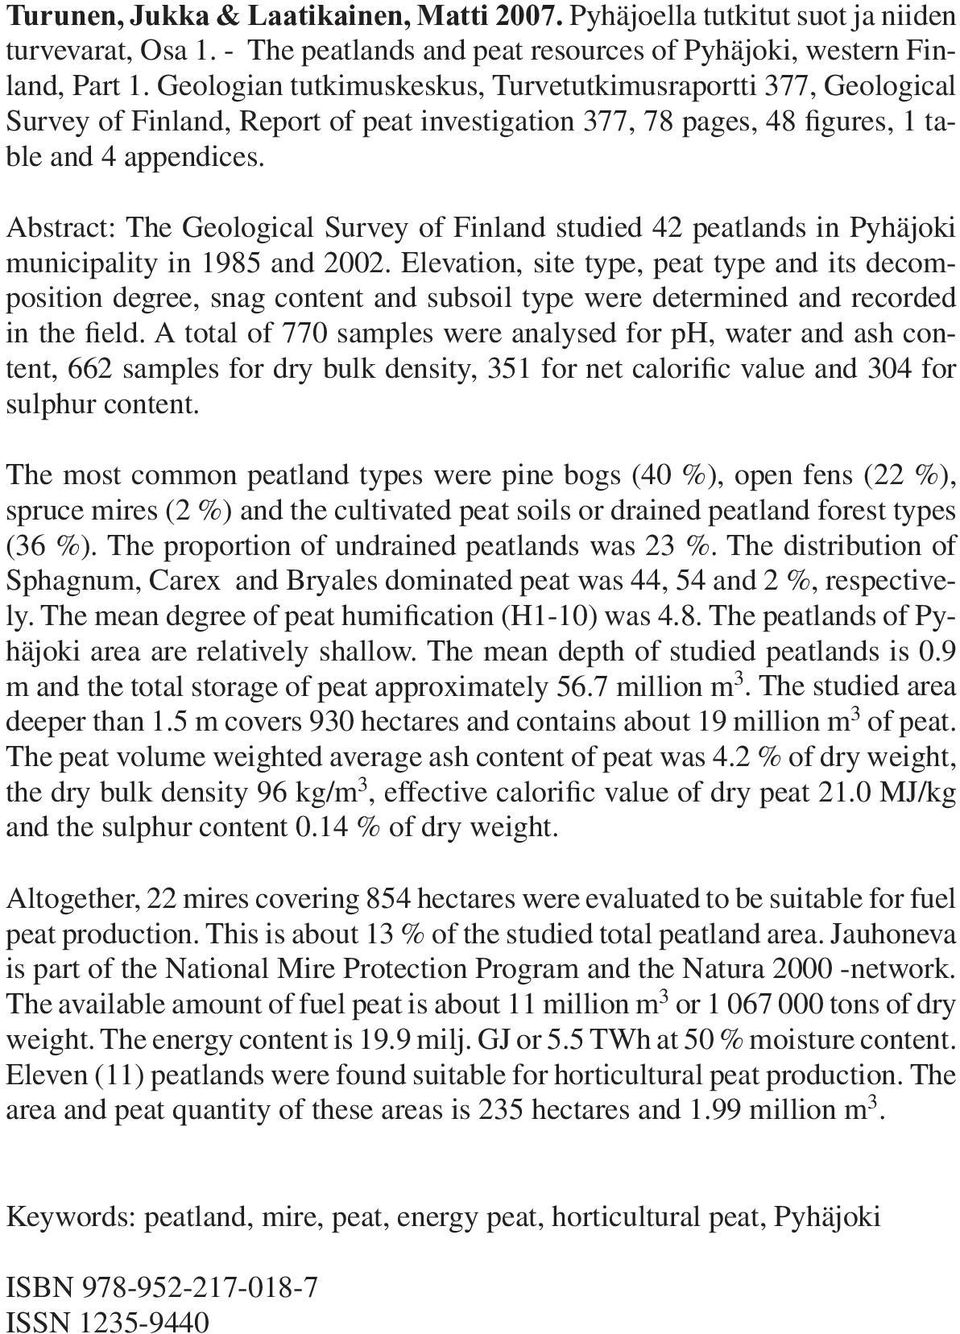 Abstract: The Geological Survey of Finland studied 42 peatlands in Pyhäjoki municipality in 1985 and 2002.